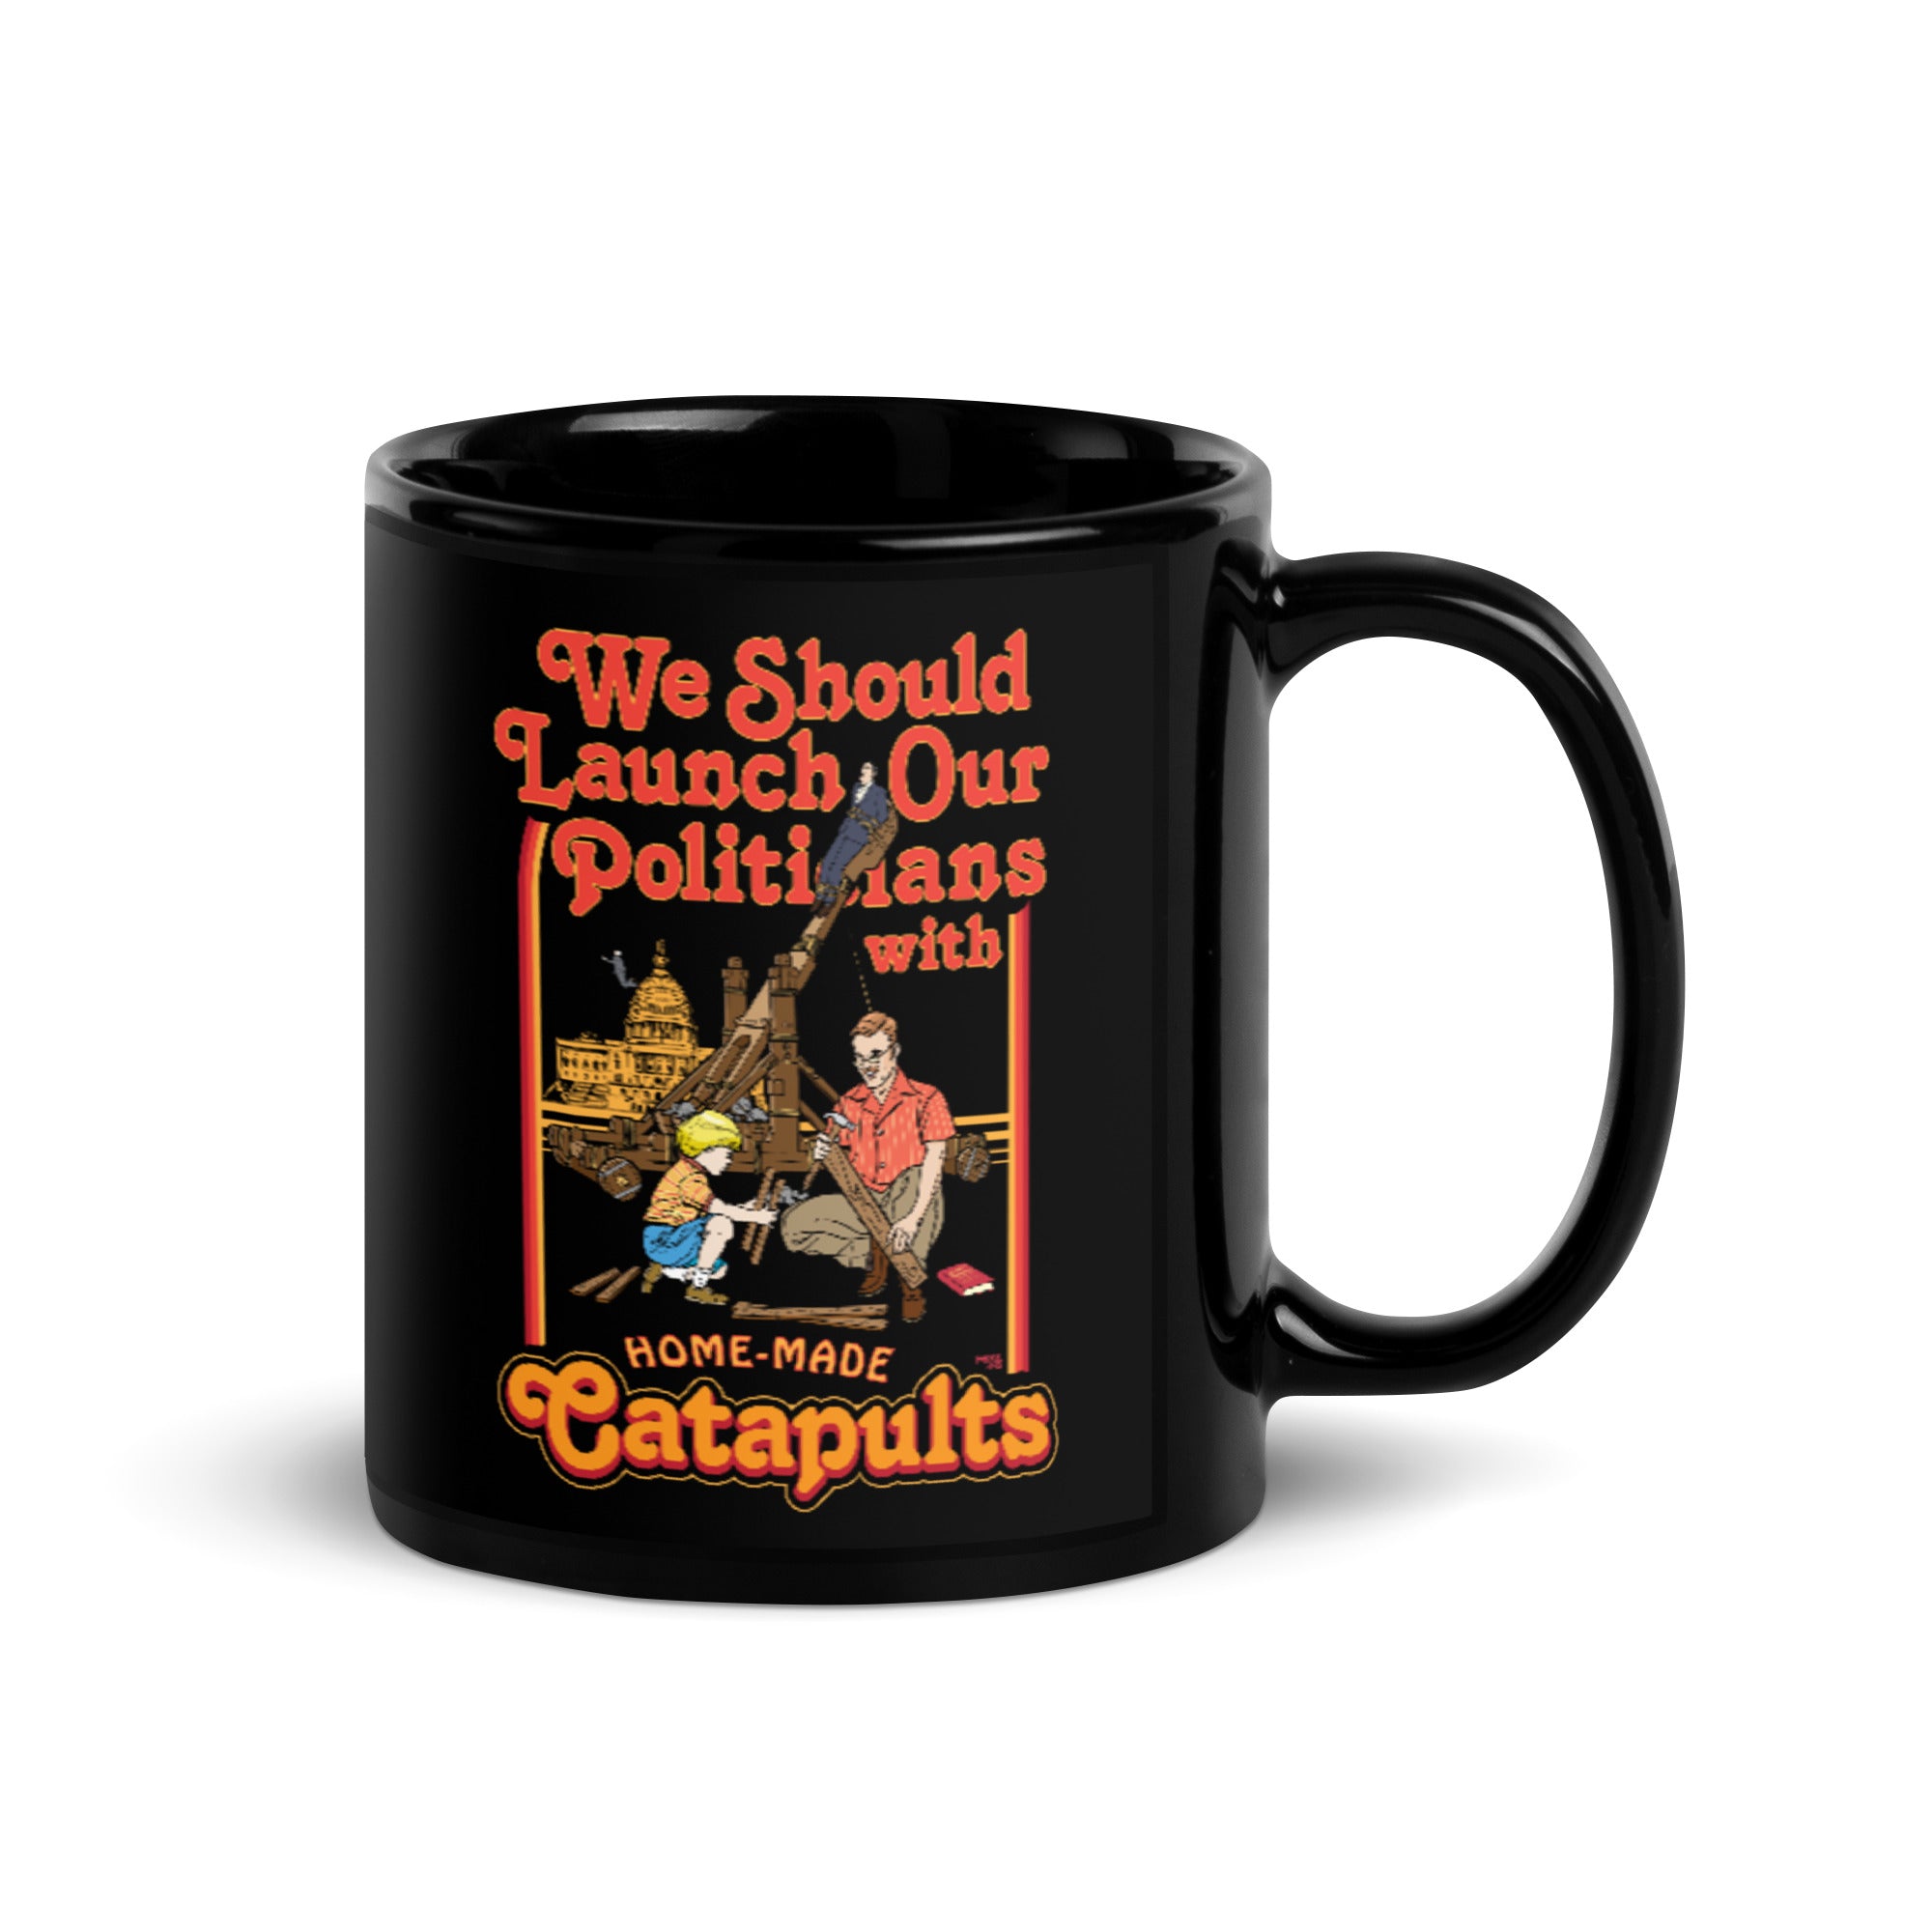 We Should Launch Our Politicians from Catapults Mug